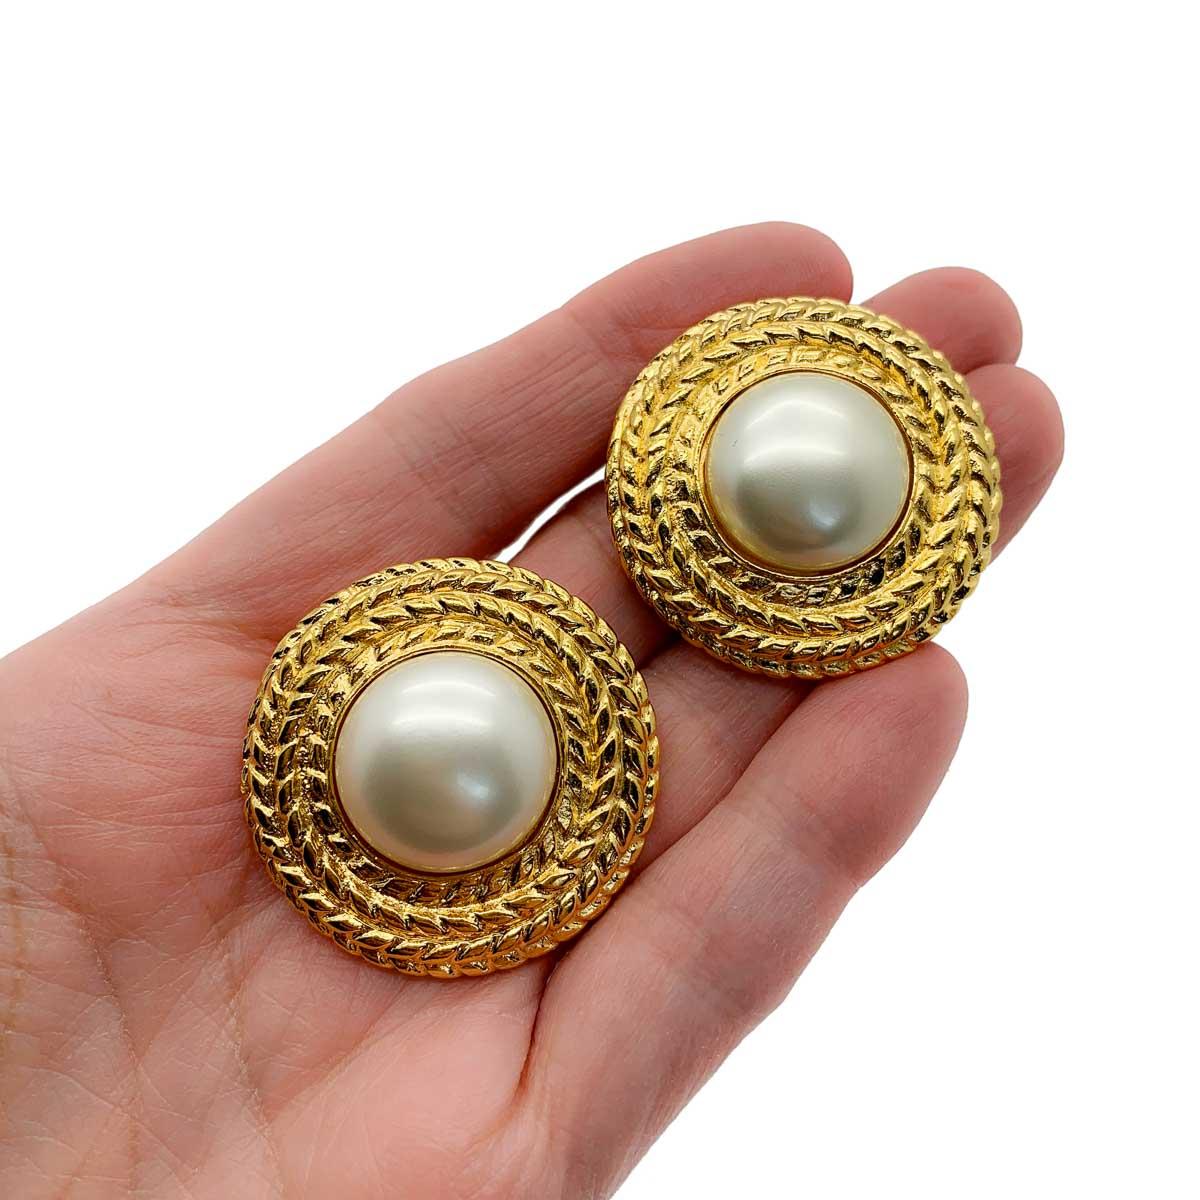 A perfect pair of vintage Chanel pearl rope earrings. Featuring a large half pearl set within a broad rope style mount. Classic Chanel.

Vintage Condition: Very good without damage or noteworthy wear. Immaculate condition.
Materials: Gold plated